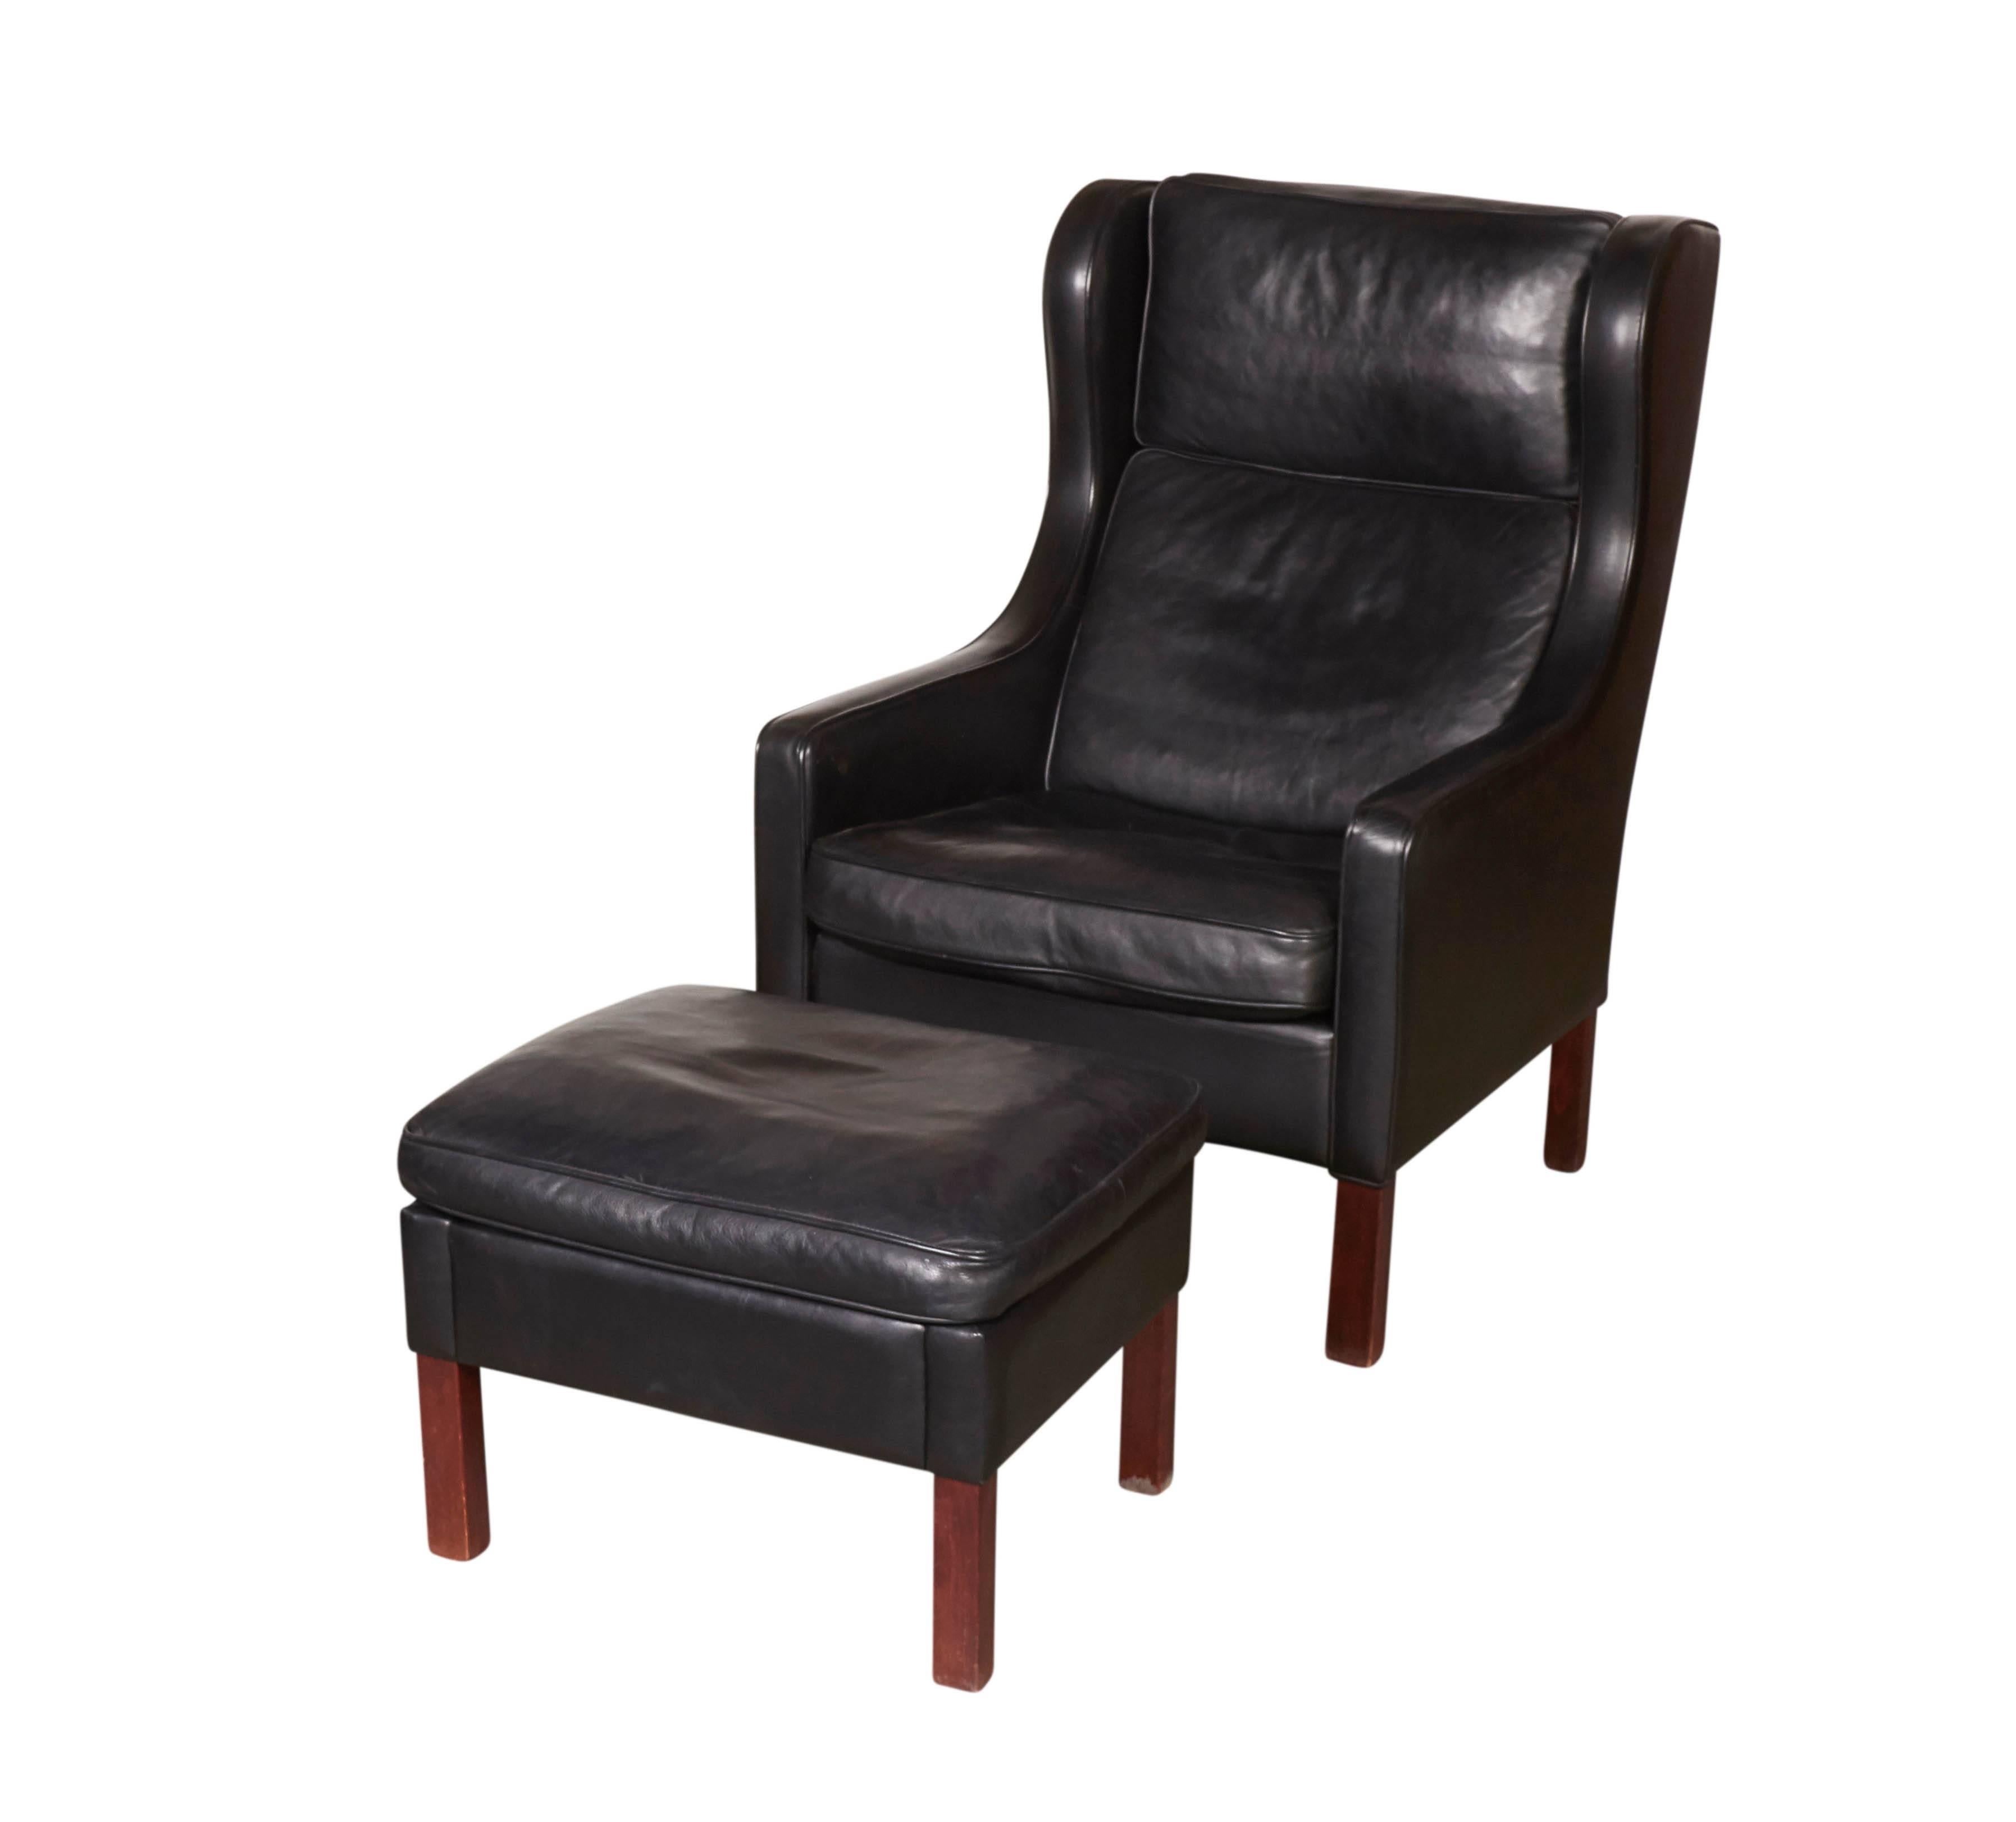 Scandinavian Modern Mid Century Leather Wingback Chairs with Ottoman